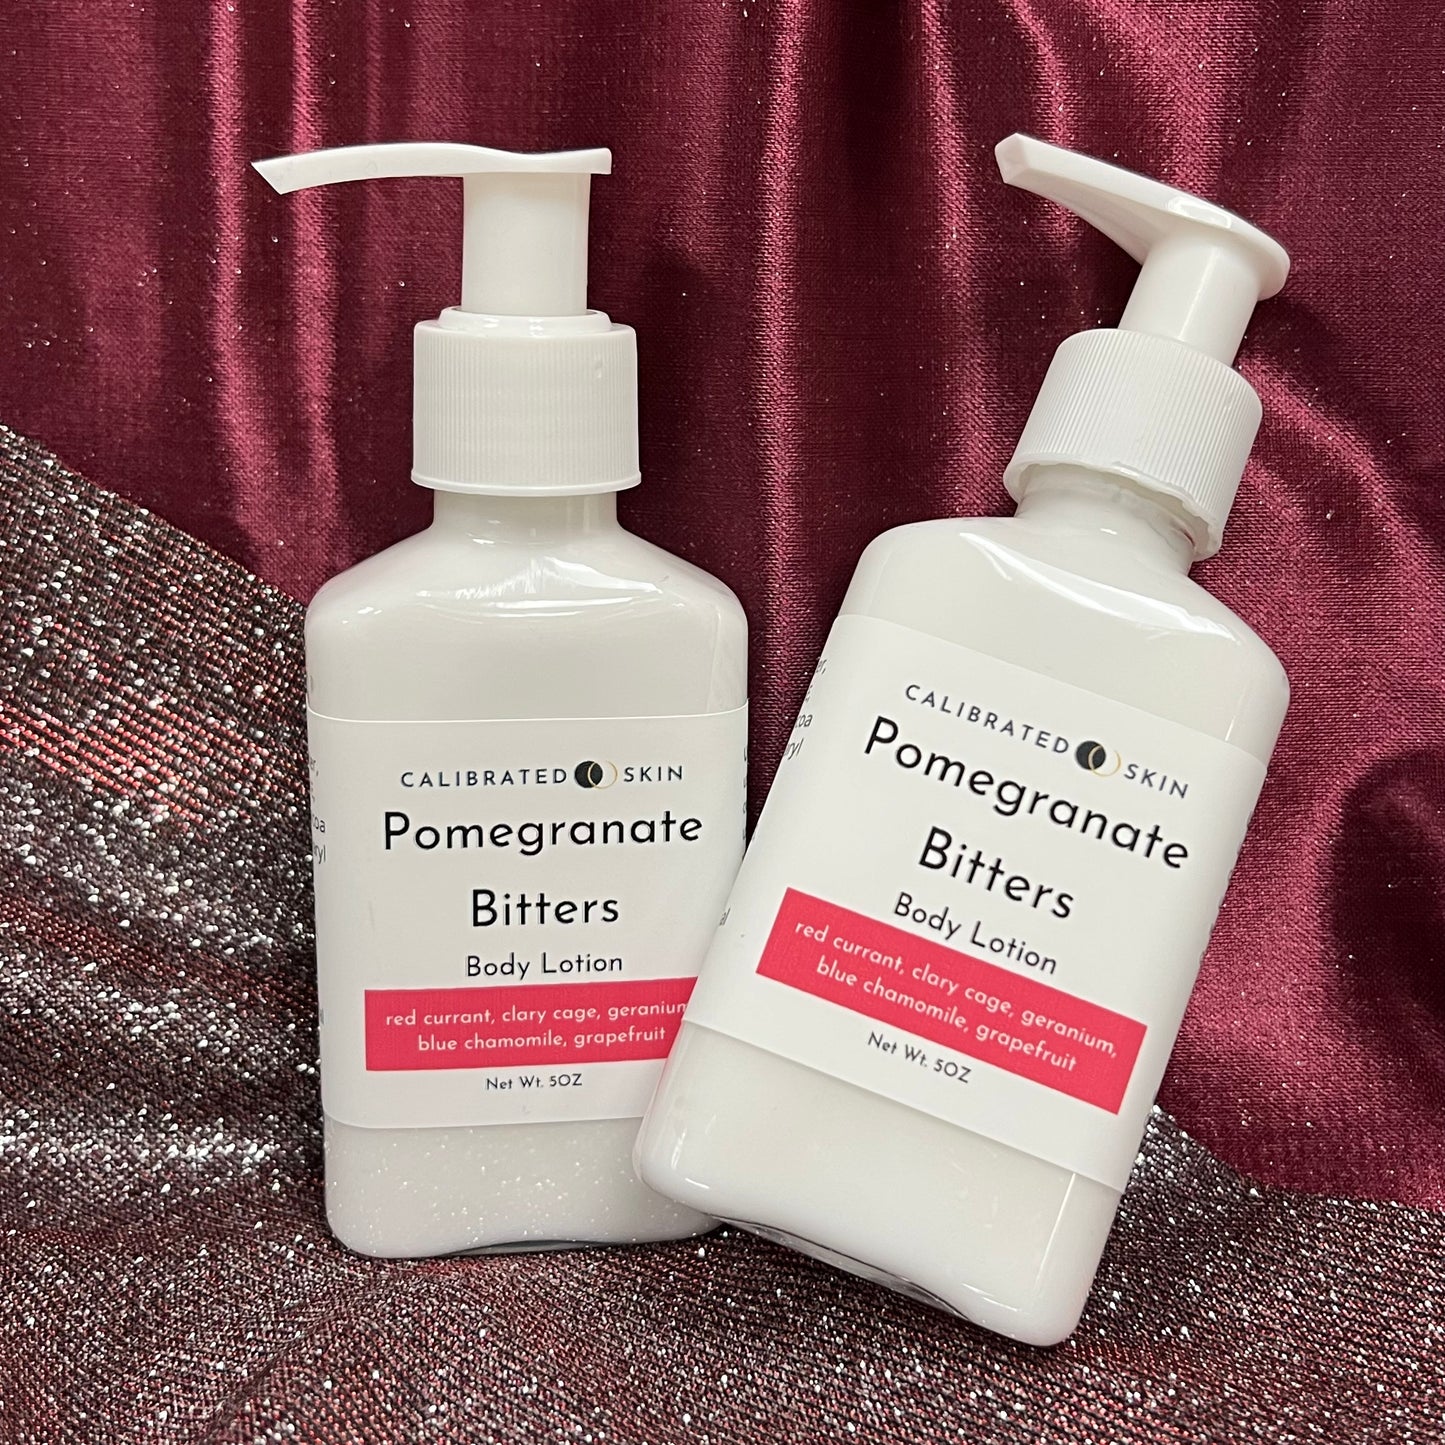 Pomegranate Bitters Body Lotion (pomegranate, citrus, red currant)